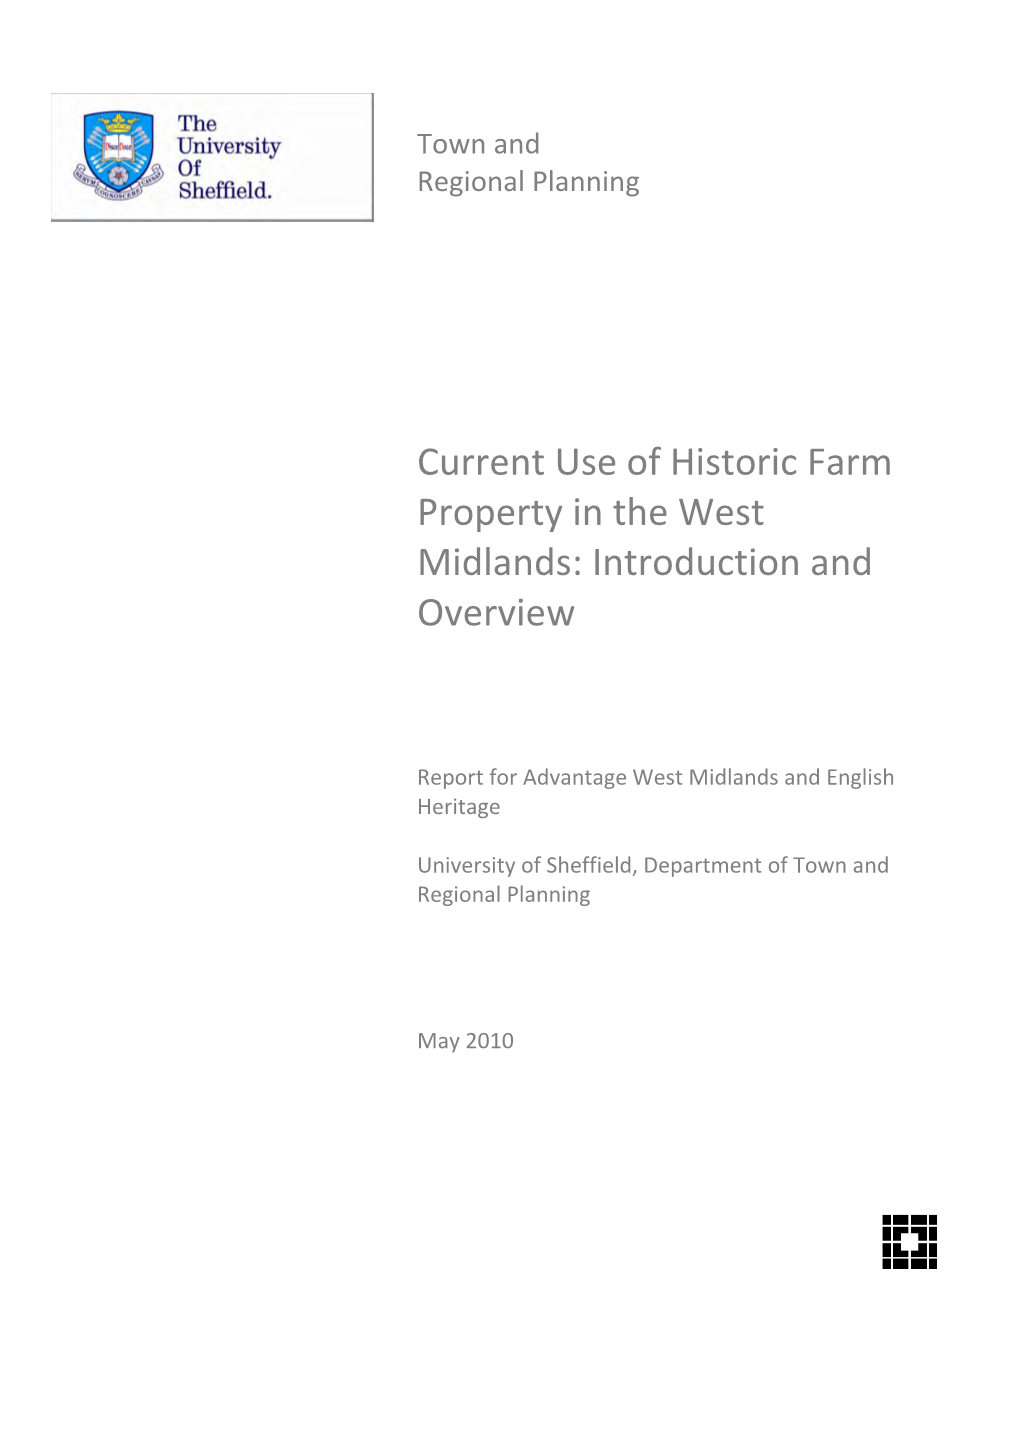 Current Use of Historic Farm Property in the West Midlands: Introduction and Overview